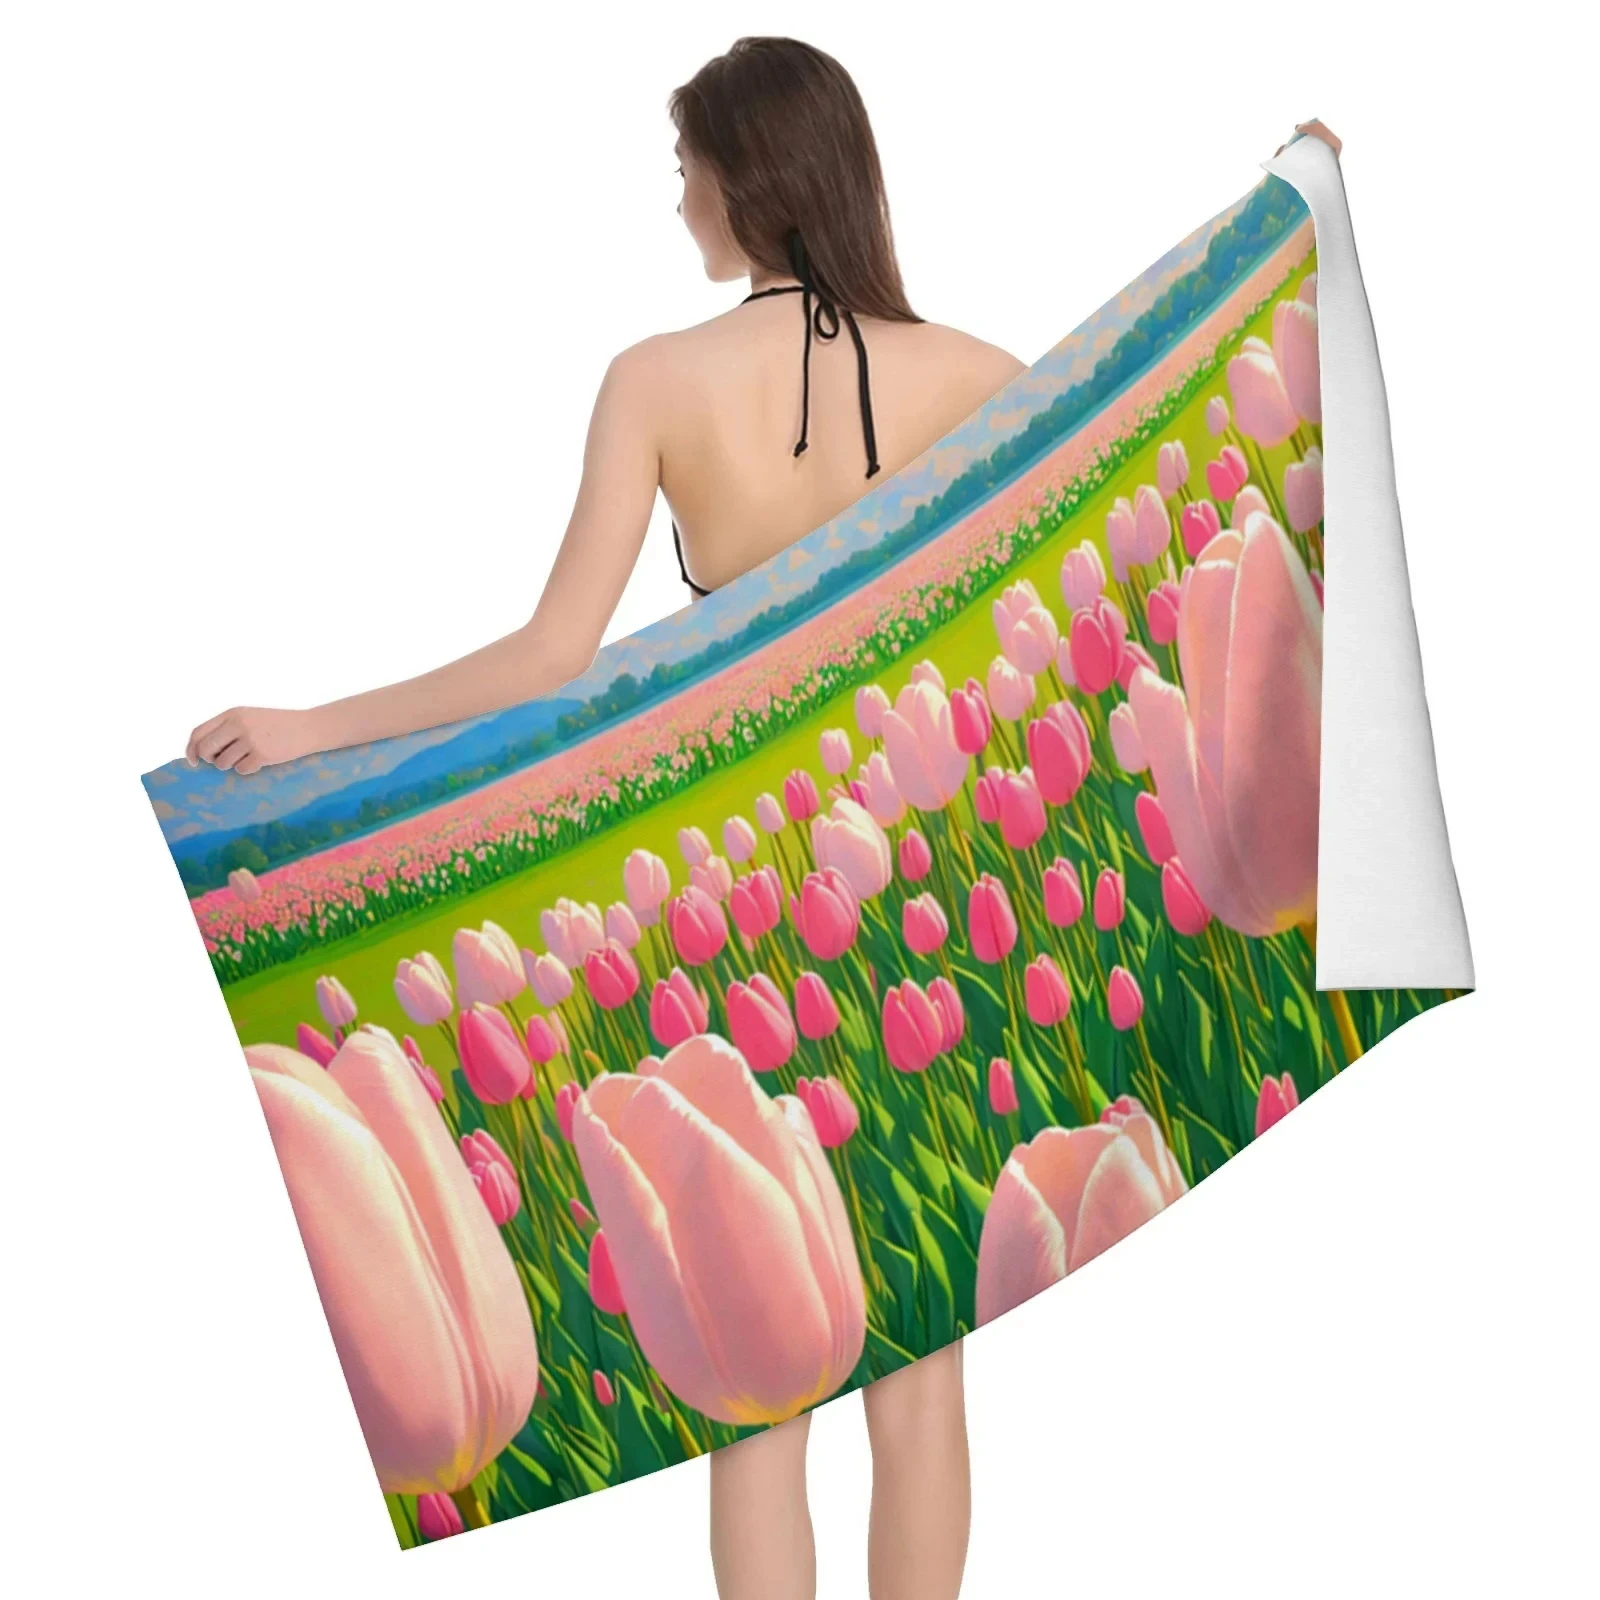 

Pink Tulip Flower Beach Towel Sand Free Soft Quick-Dry Bath Towel Microfiber Face Towels for Swimming Pool Gym Travel Sport Spa